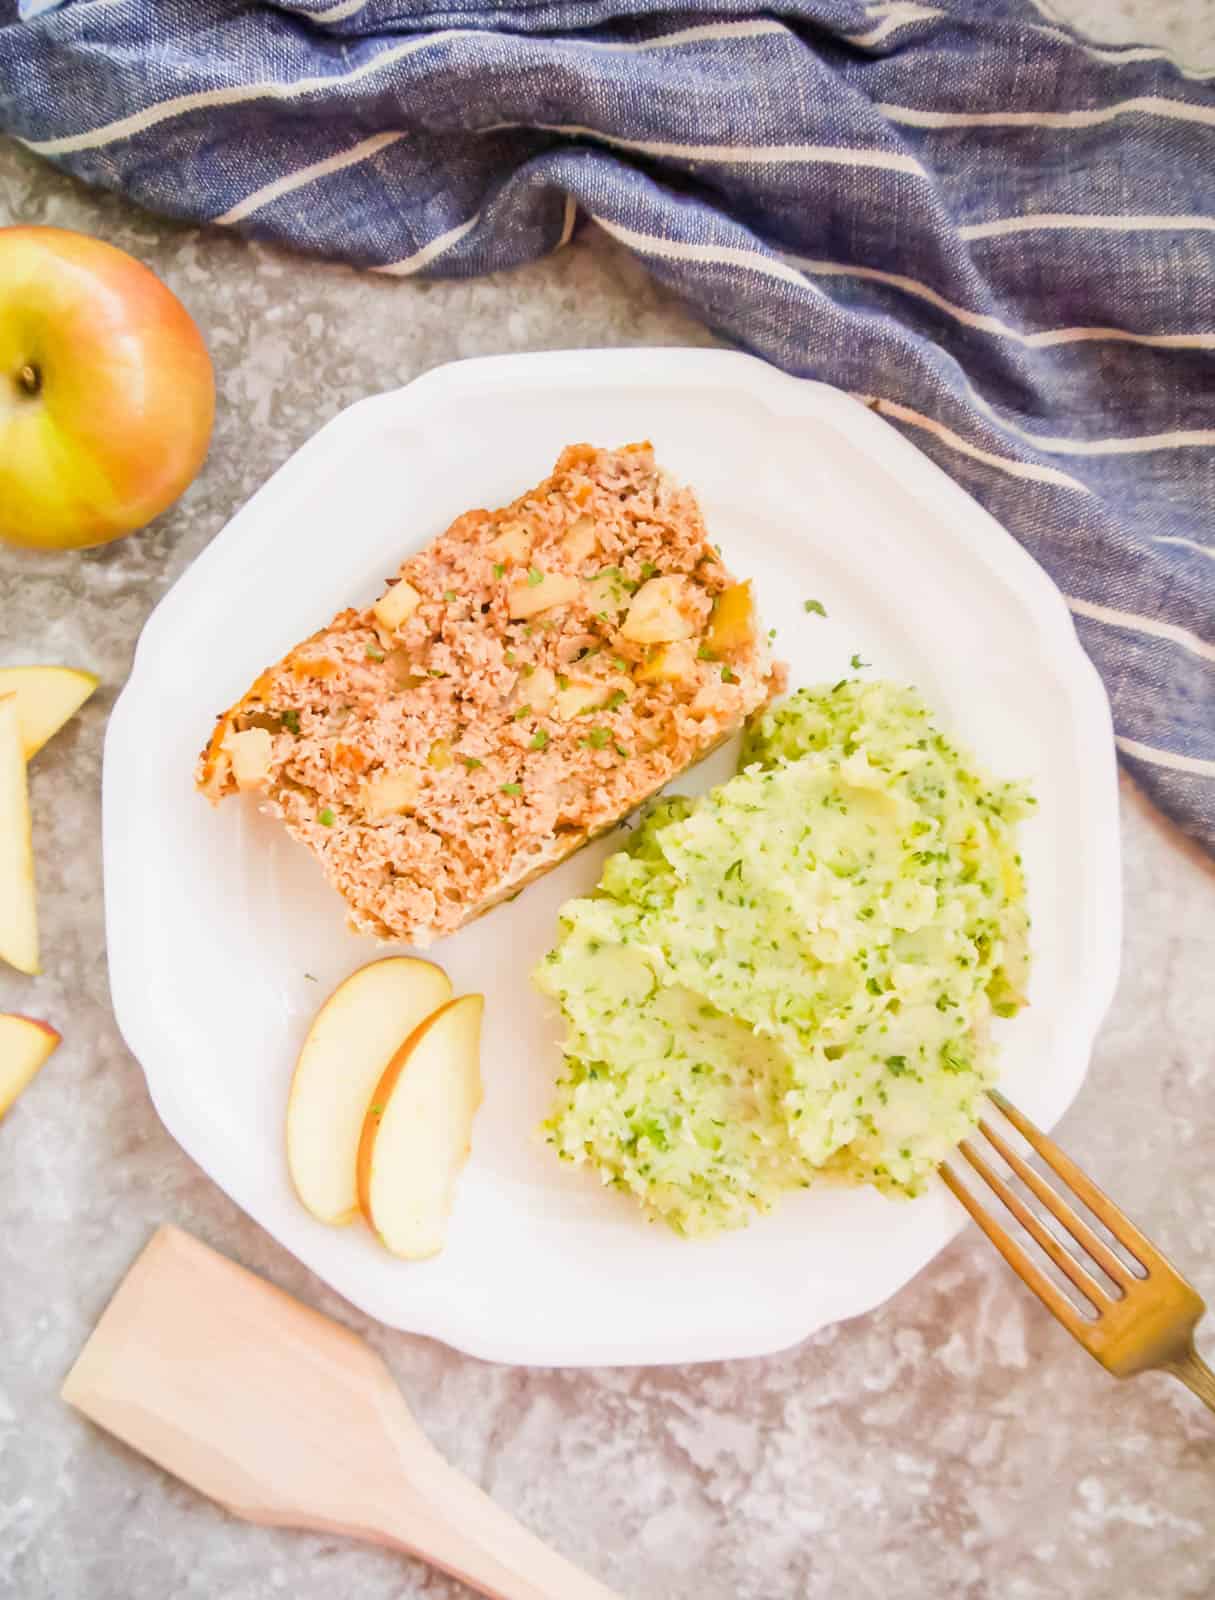 A slice of paleo meatloaf with apples in it on a plate.